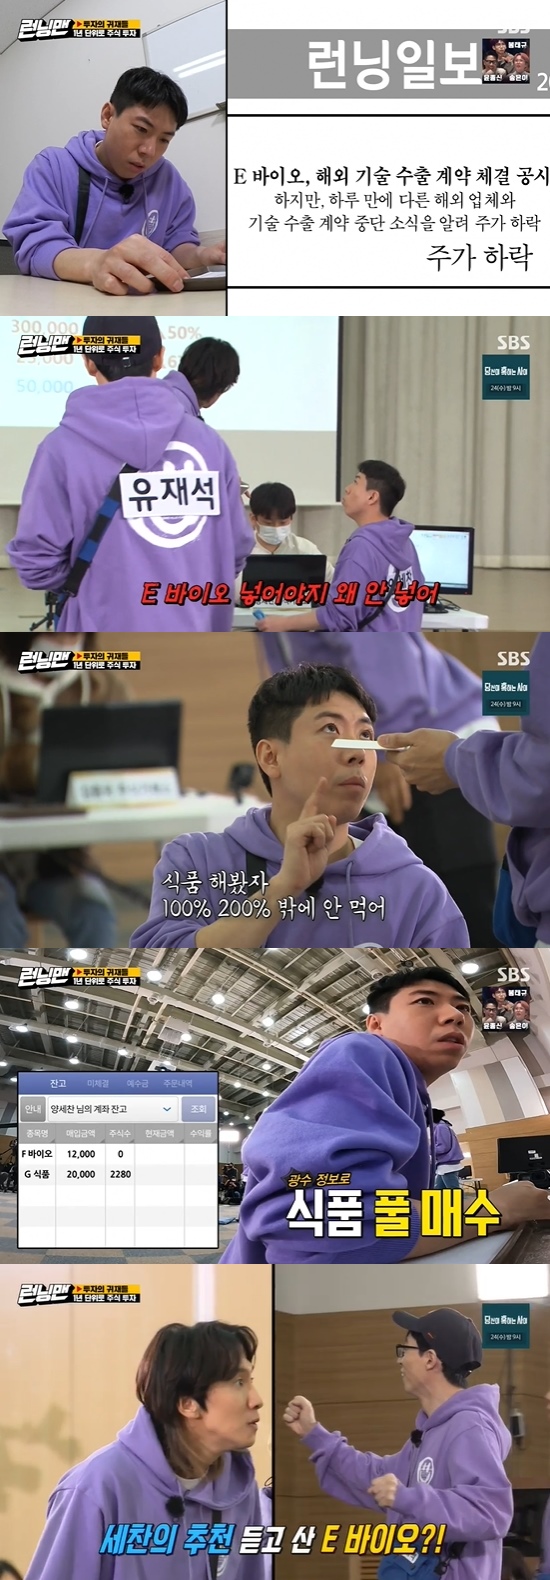 Running Man Yang Se-chan has become a staple of investmentOn SBS Good Sunday - Running Man broadcasted on the 21st, members were drawn to become a master of investment.The stock investment race began on the day, with members starting investing in running money of 500,000 won, and three investment times were available for purchase and sale in private money.The information needed was available.First, the stock market opened in 2011; Yang Se-chan proudly entered the stock exchange, saying, The king ants are here.Ji Suk-jin, who bought HBeauty information, told Jeon So-min, Yang Se-chan to buy Andreu Buenafuente after buying all of HBeauty shares.Yoo Jae-Suk, who overheard this, also bought Andreu Buenafuente.Unlike Ji Suk-jins forecast, Andreu Buenafuente rose 900%, while Yang Se-chan had a whopping 540% return.Yang Se-chan bought G food after obtaining information that Andreu Buenafuente was falling.But he lied to Jeon So-min, Lee Kwang-soo, that he could have another two years of Andreu Buenafuente.Andreu Buenafuente has plunged more than 80 percent, and Yang Se-chan, who switched to IT, said: Im Young and Rich.Jeon So-min told Yang Se-chan, You told me you had Andreu Buenafuente, but Yang Se-chan said, Do you hear all about me?About raised: Andreu Buenafuente, who had HBeauty so the yield was half-cut, Lee Kwang-soo said: Wheres my money.Gimme my money. Ji Suk-jin, who bought HBeauty, did not believe that K - Beauty was good at this time.Then the mission to get information points began: The first discussion topic was: Who will win if Yoo Jae-Suk and Ji Suk-jin fight with power?Yoo Jae-Suk and Ji Suk-jin showed off their respective powers with kicks; Ji Suk-jin said: He doesnt beat his 30-year sentence.Its right, but its right, but sometimes its right when it happens, said Yoo Jae-Suk.The staff picked Yoo Jae-Suk, and the B team received three points each.The second topic of discussion was Kim Jong-kook marries within three years; Kim Jong-kook stated: I dont know, Ill go as soon as I choose.Kim Jong-kook, who chose marrying as a costume, said, I will do it in three years, but the members who chose I can not responded, Women should like it together.Lee Kwang-soo said, Kim Jong-kook will do it in three years, but if he does not, will he stay still?Jeon So-min tried to say, I should not think of this, but I think I might not be able to hear it, but Kim Jong-kook quickly blocked the mouth of Jeon So-min.If you say you cant, Ill introduce you to your sister, who is one year old, Yoo Jae-Suk said, adding that staff chose to marry.The winner of 2014 was H Beauty; up 150 percent; Ji Suk-jin was shocked Ive lost all of my beauty.The 2014 financial asset rankings showed Yang Se-chan to be the overwhelming first; the second was Yoo Jae-Suk.I had two years of HBeauty that was so unfair, and it surged as soon as I sold it, Ji Suk-jin said.Yang Se-chan all in FVaio, but shed her return-poor Lee Kwang-soo to buy EVaio.Lee Kwang-soo said, Its not time for me to play, but Yang Se-chan said to the end, EVaio is FDA approved.All In One Lee Kwang-soo on EVaio so the chapter closed in 2014.Soon after, in 2015, FVaio, which Yang Se-chan bought, was 500%, but EVaio, where Yang Se-chan spilled fake news, surged 1100%.The parasitic Lee Kwang-soo kneeled to Yang Se-chan, who was greeted bitterly.Ji Suk-jin, who only attacked Vaio, could not hide his smile. Ji Seo-jin, who saw Yang Se-chan, who totaled 45 million won, said, Is not it a good investment?Yang Se-chan then knew that EVaio shares were falling, but recommended EVaio to Lee Kwang-soo.Lee Kwang-soo unwittingly informed Yang Se-chan of G food information, and Yang Se-chan bought G food based on this.As a result, only Yang Se-chan earned revenue; Yang Se-chan, who surpassed 57 million won, said, You can buy a car in a little while.Song Ji-hyo, who was recommended EVaio by Yoo Jae-Suk and Yoo Jae-Suk, who had heard the first step information from Lee Kwang-soo and bought EVaio, could not speak.Ji Suk-jin laughed, saying, What do you do if you eat R money here? The actual account is down.Later, the crew handed Yang Se-chan a blank index, saying there was no change to go back.Photo = SBS Broadcasting Screen